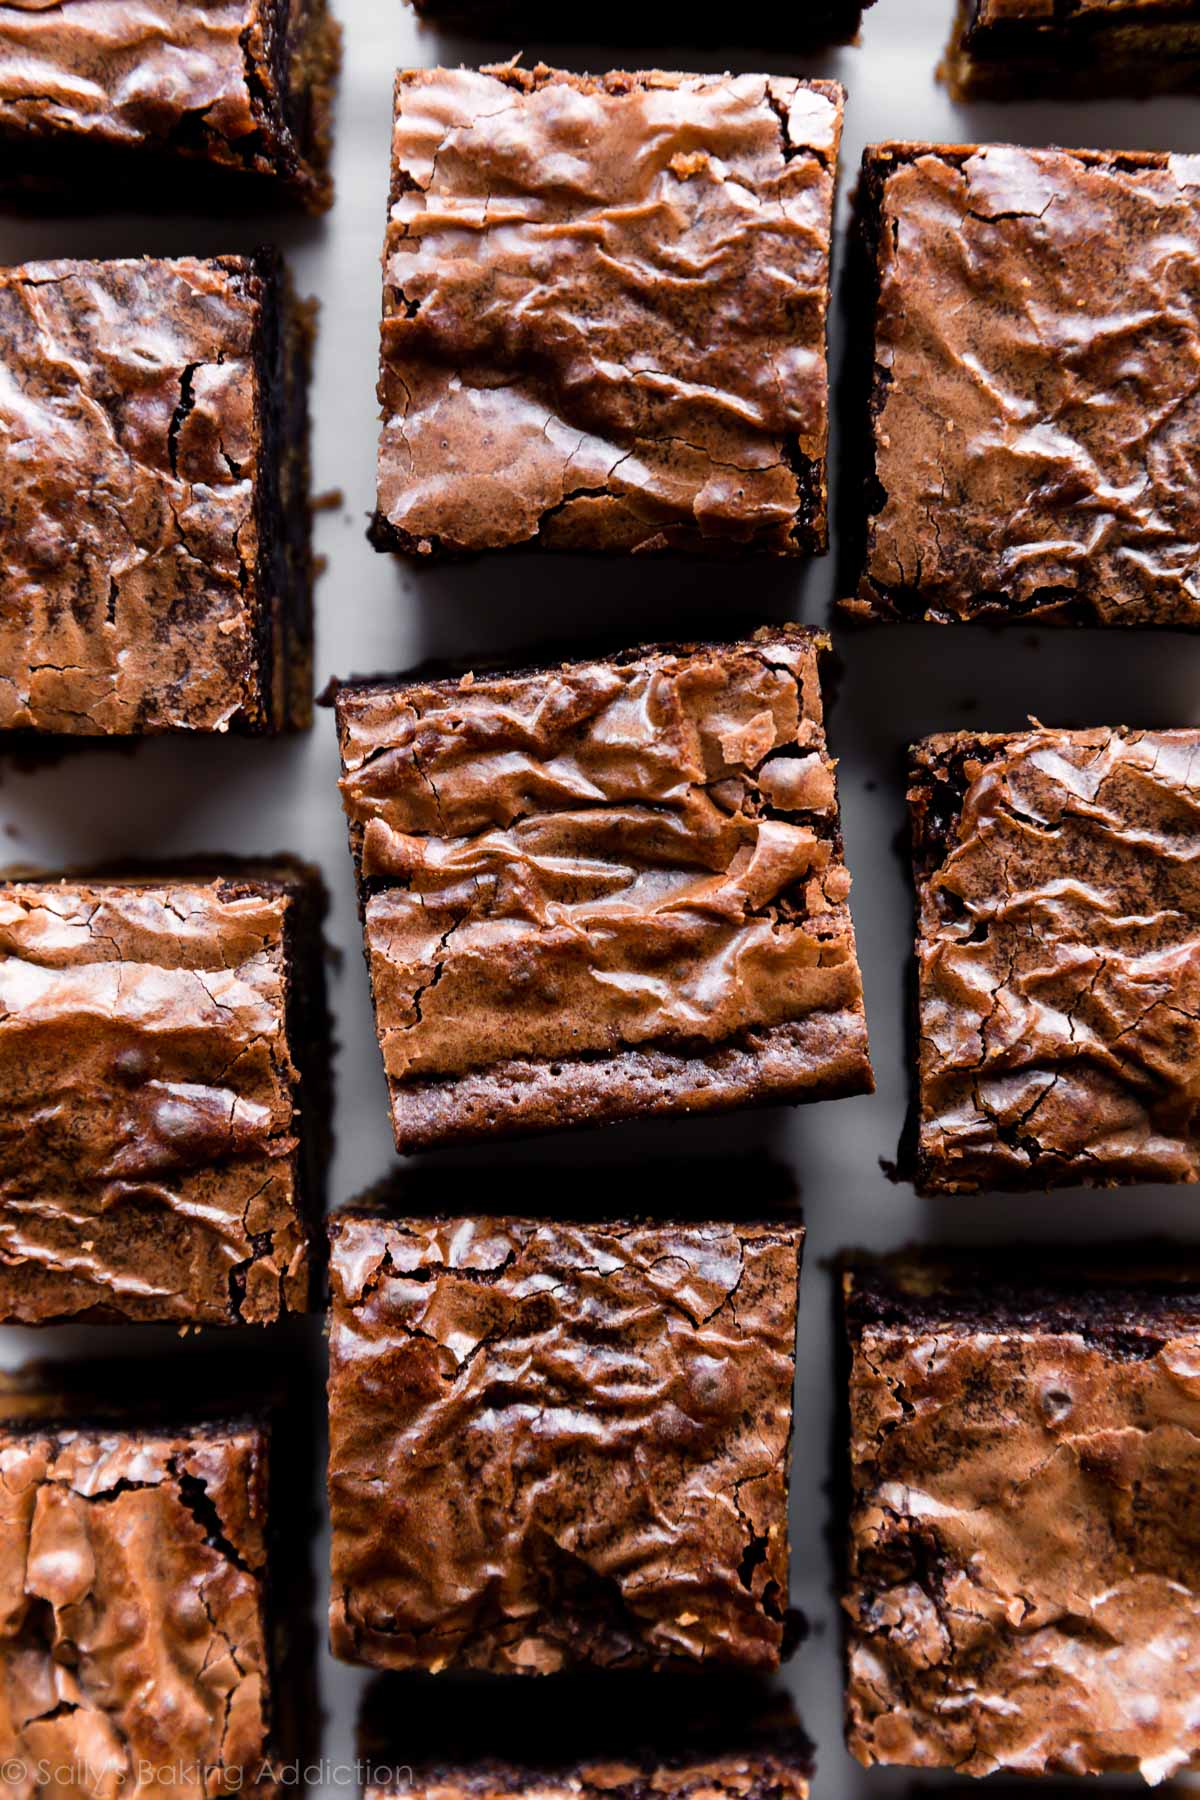 Shiny crackly brownie tops